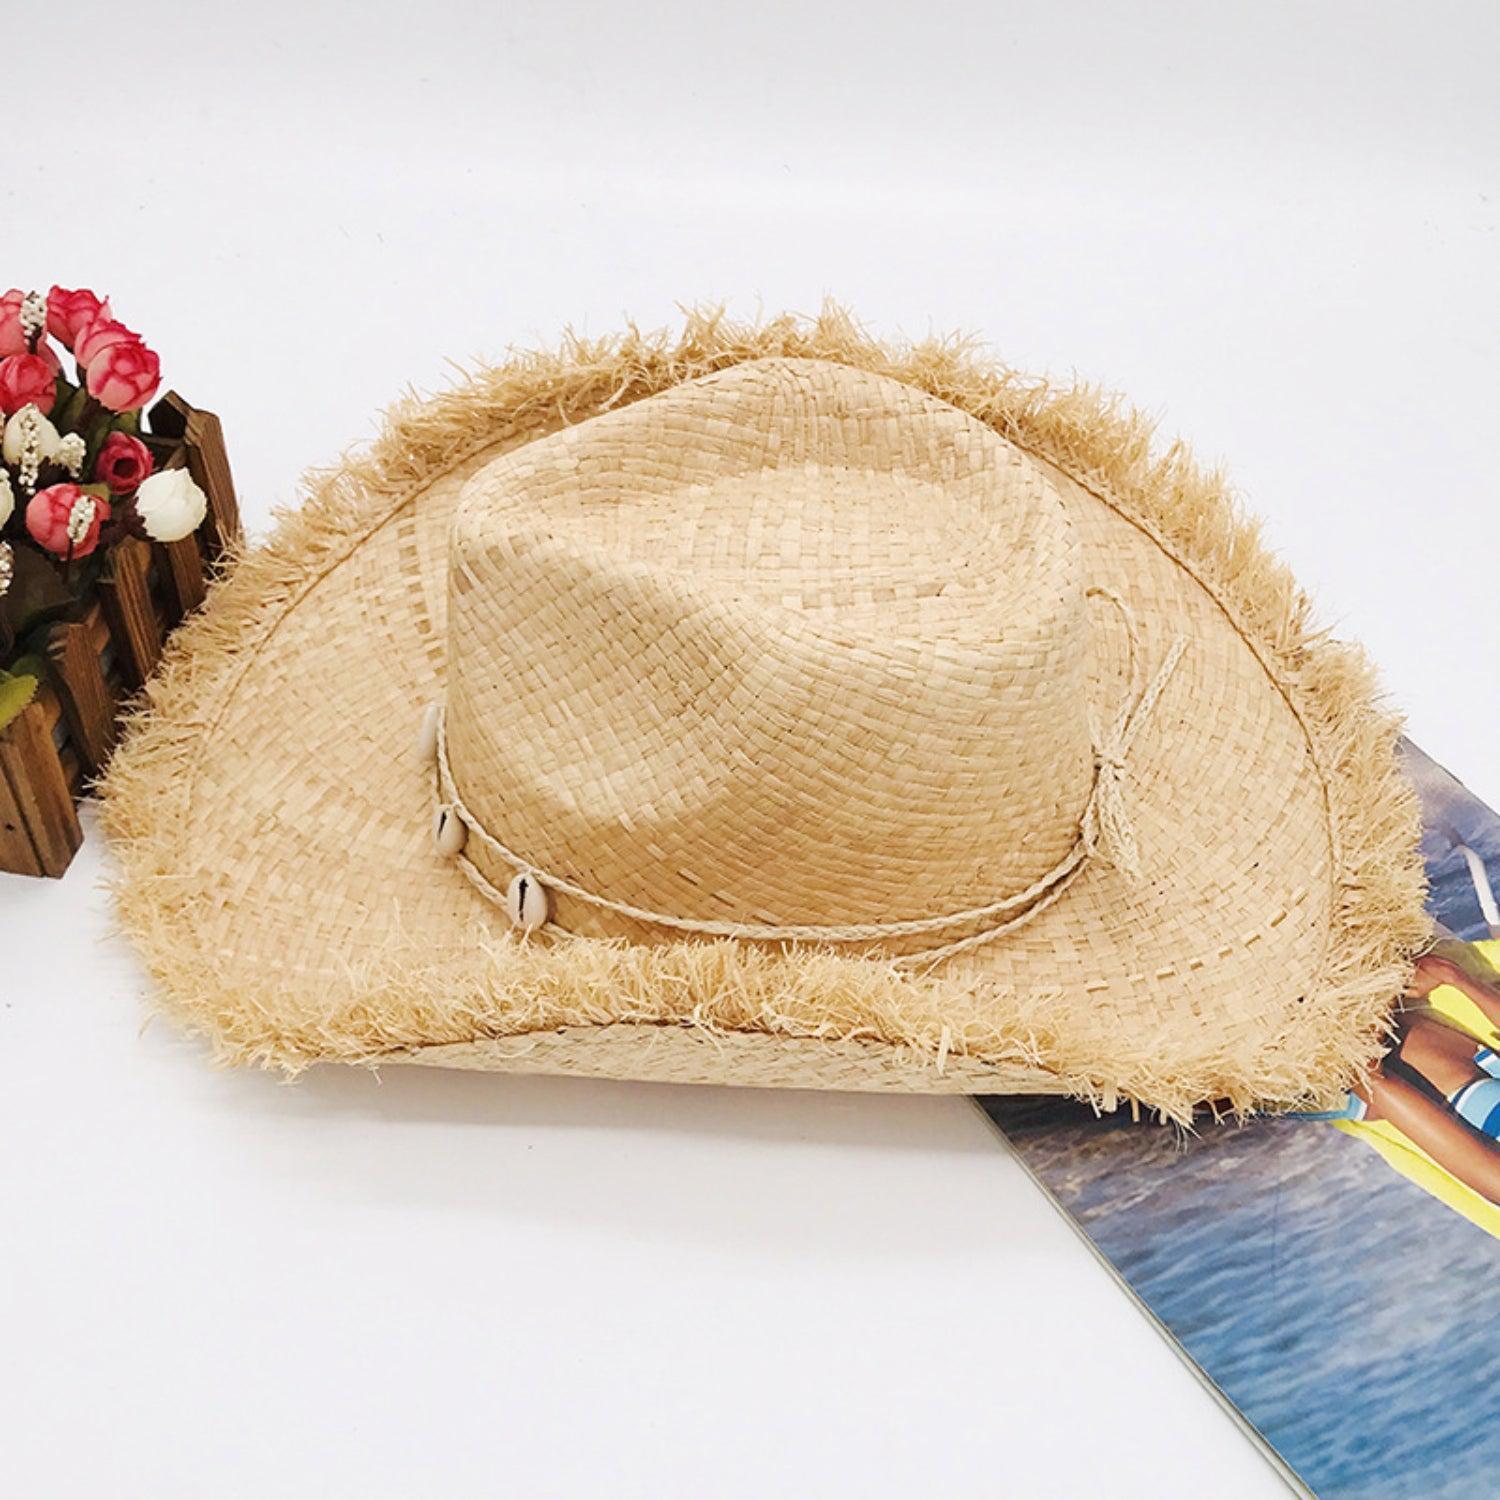 a straw hat sitting on top of a surfboard